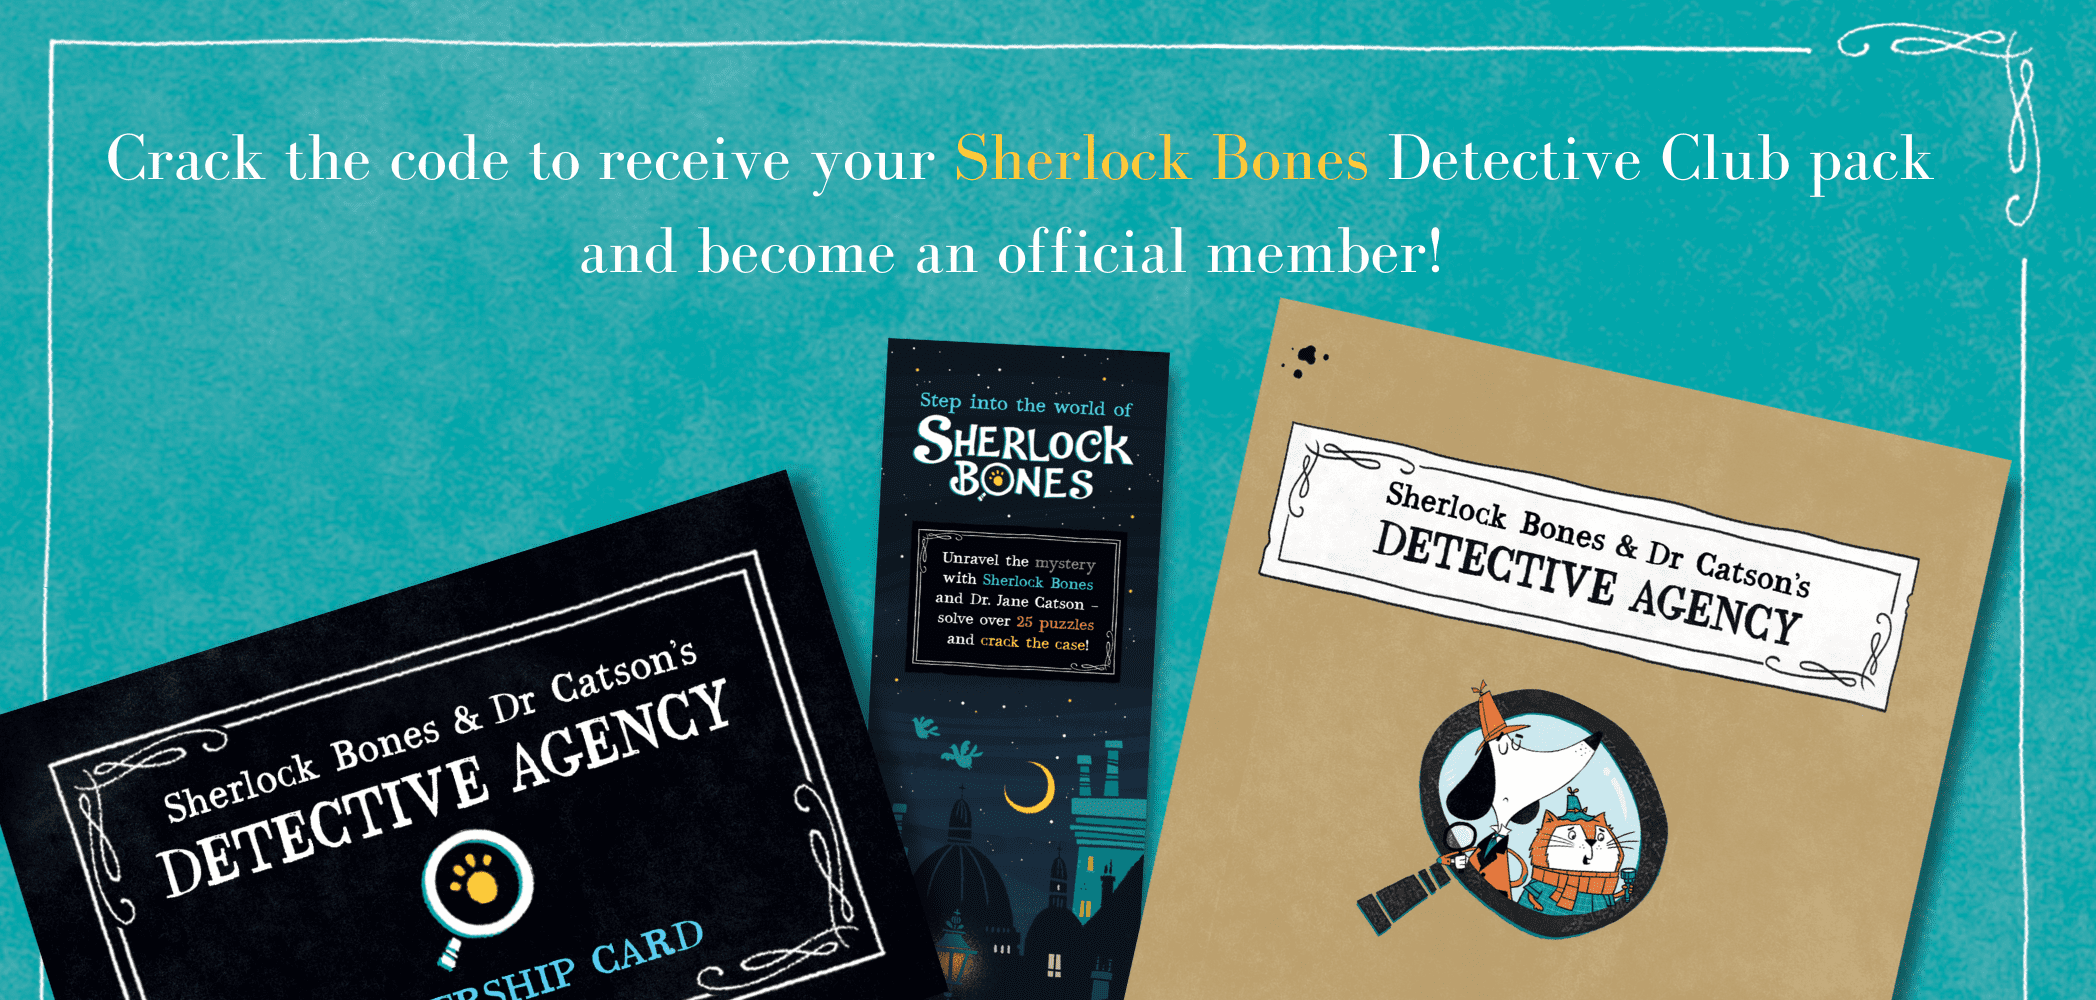 Crack the code and officially become a member of the Sherlock Bones Detective Club 